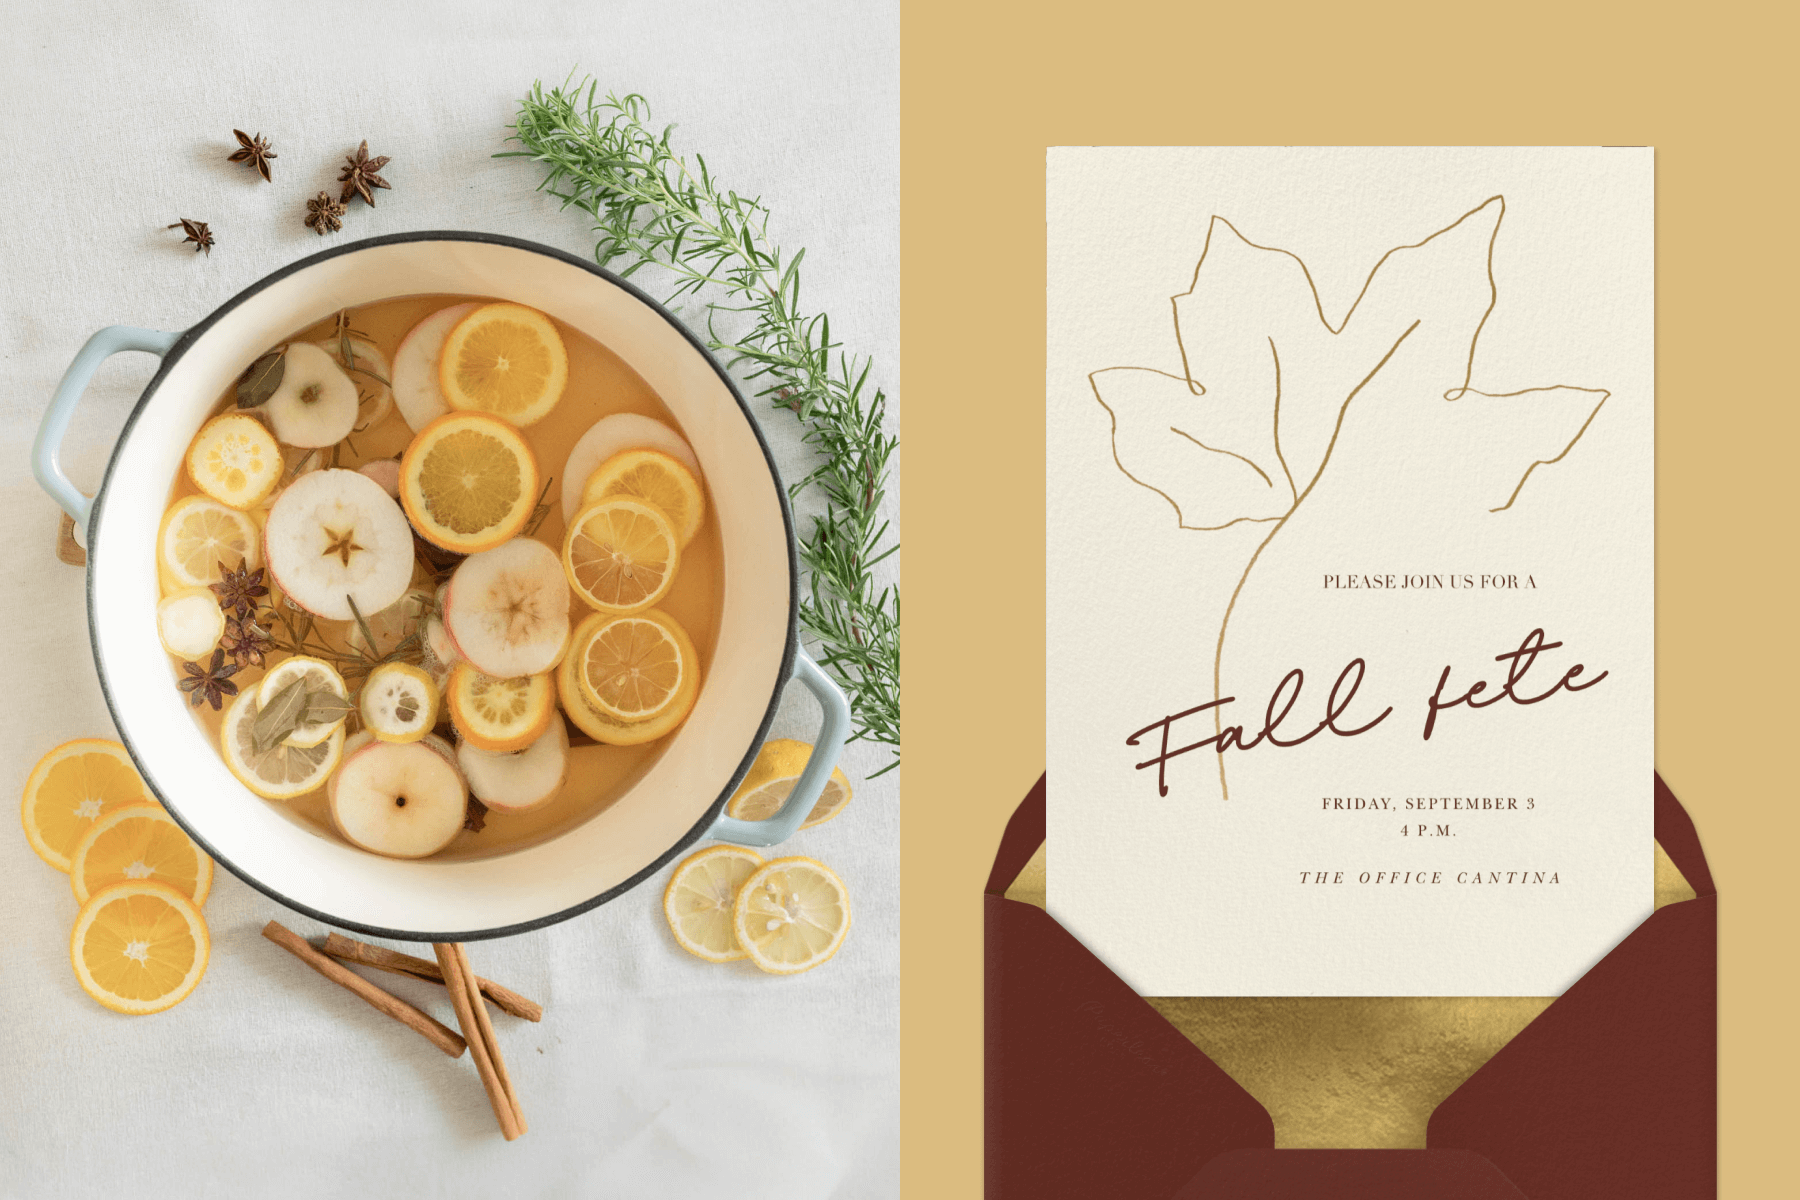 Left: An overhead photograph of a fall simmer pot infused with citrus, apples, cinnamon, and rosemary; Right: A fall party invitation featuring an illustration of a gold leaf, paired with a brown envelope.